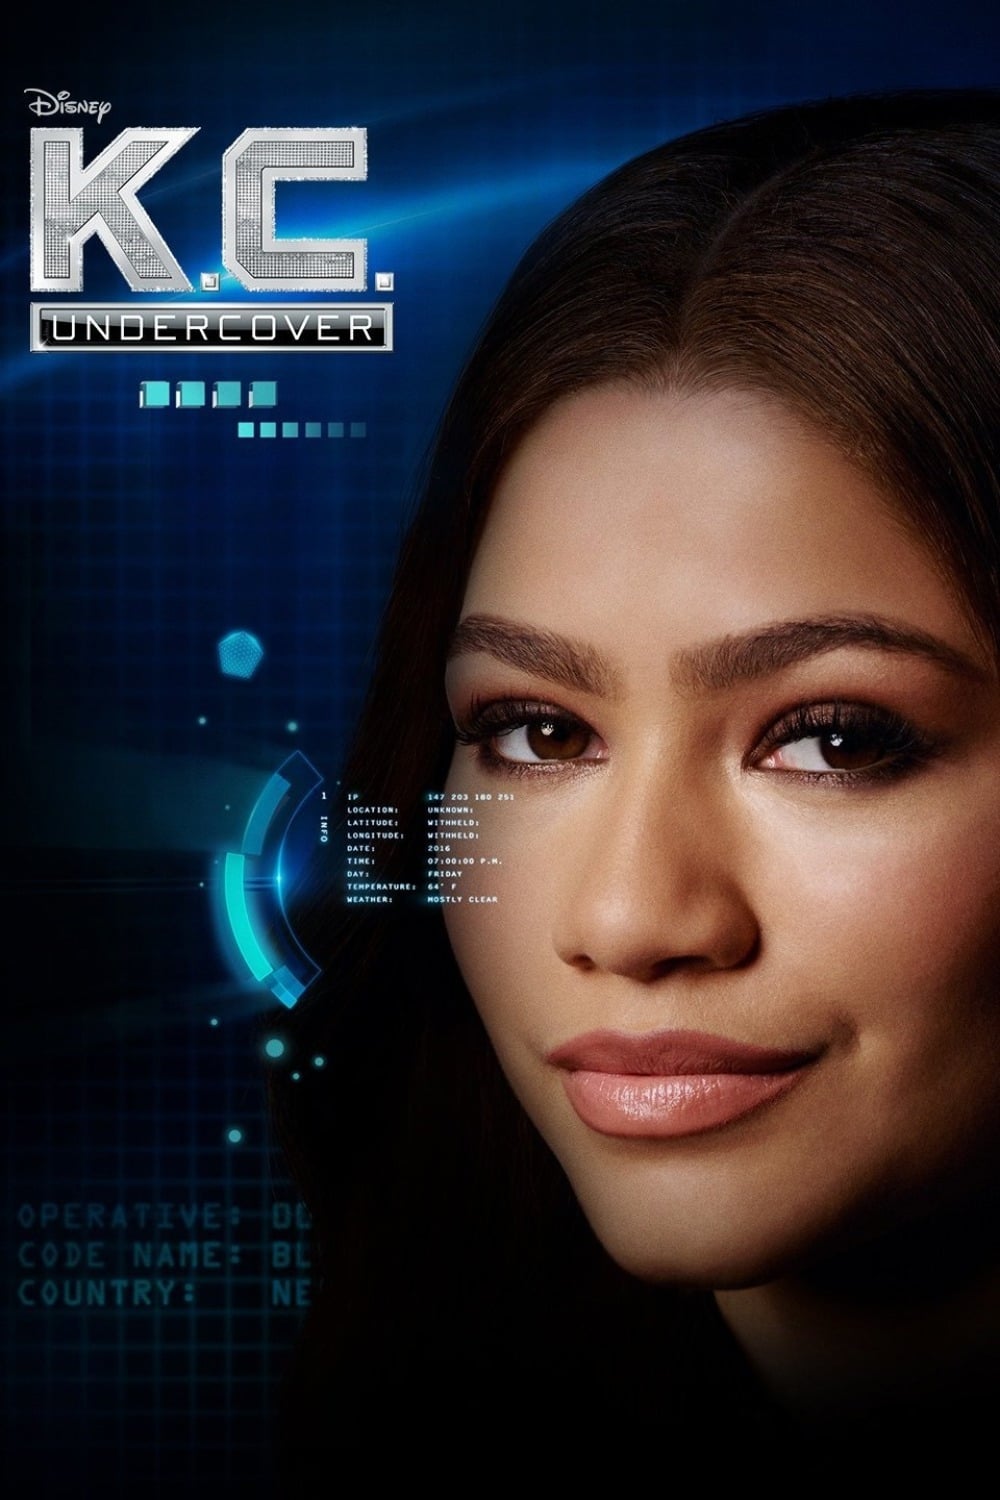 K.C. Undercover TV Shows About Black Lead